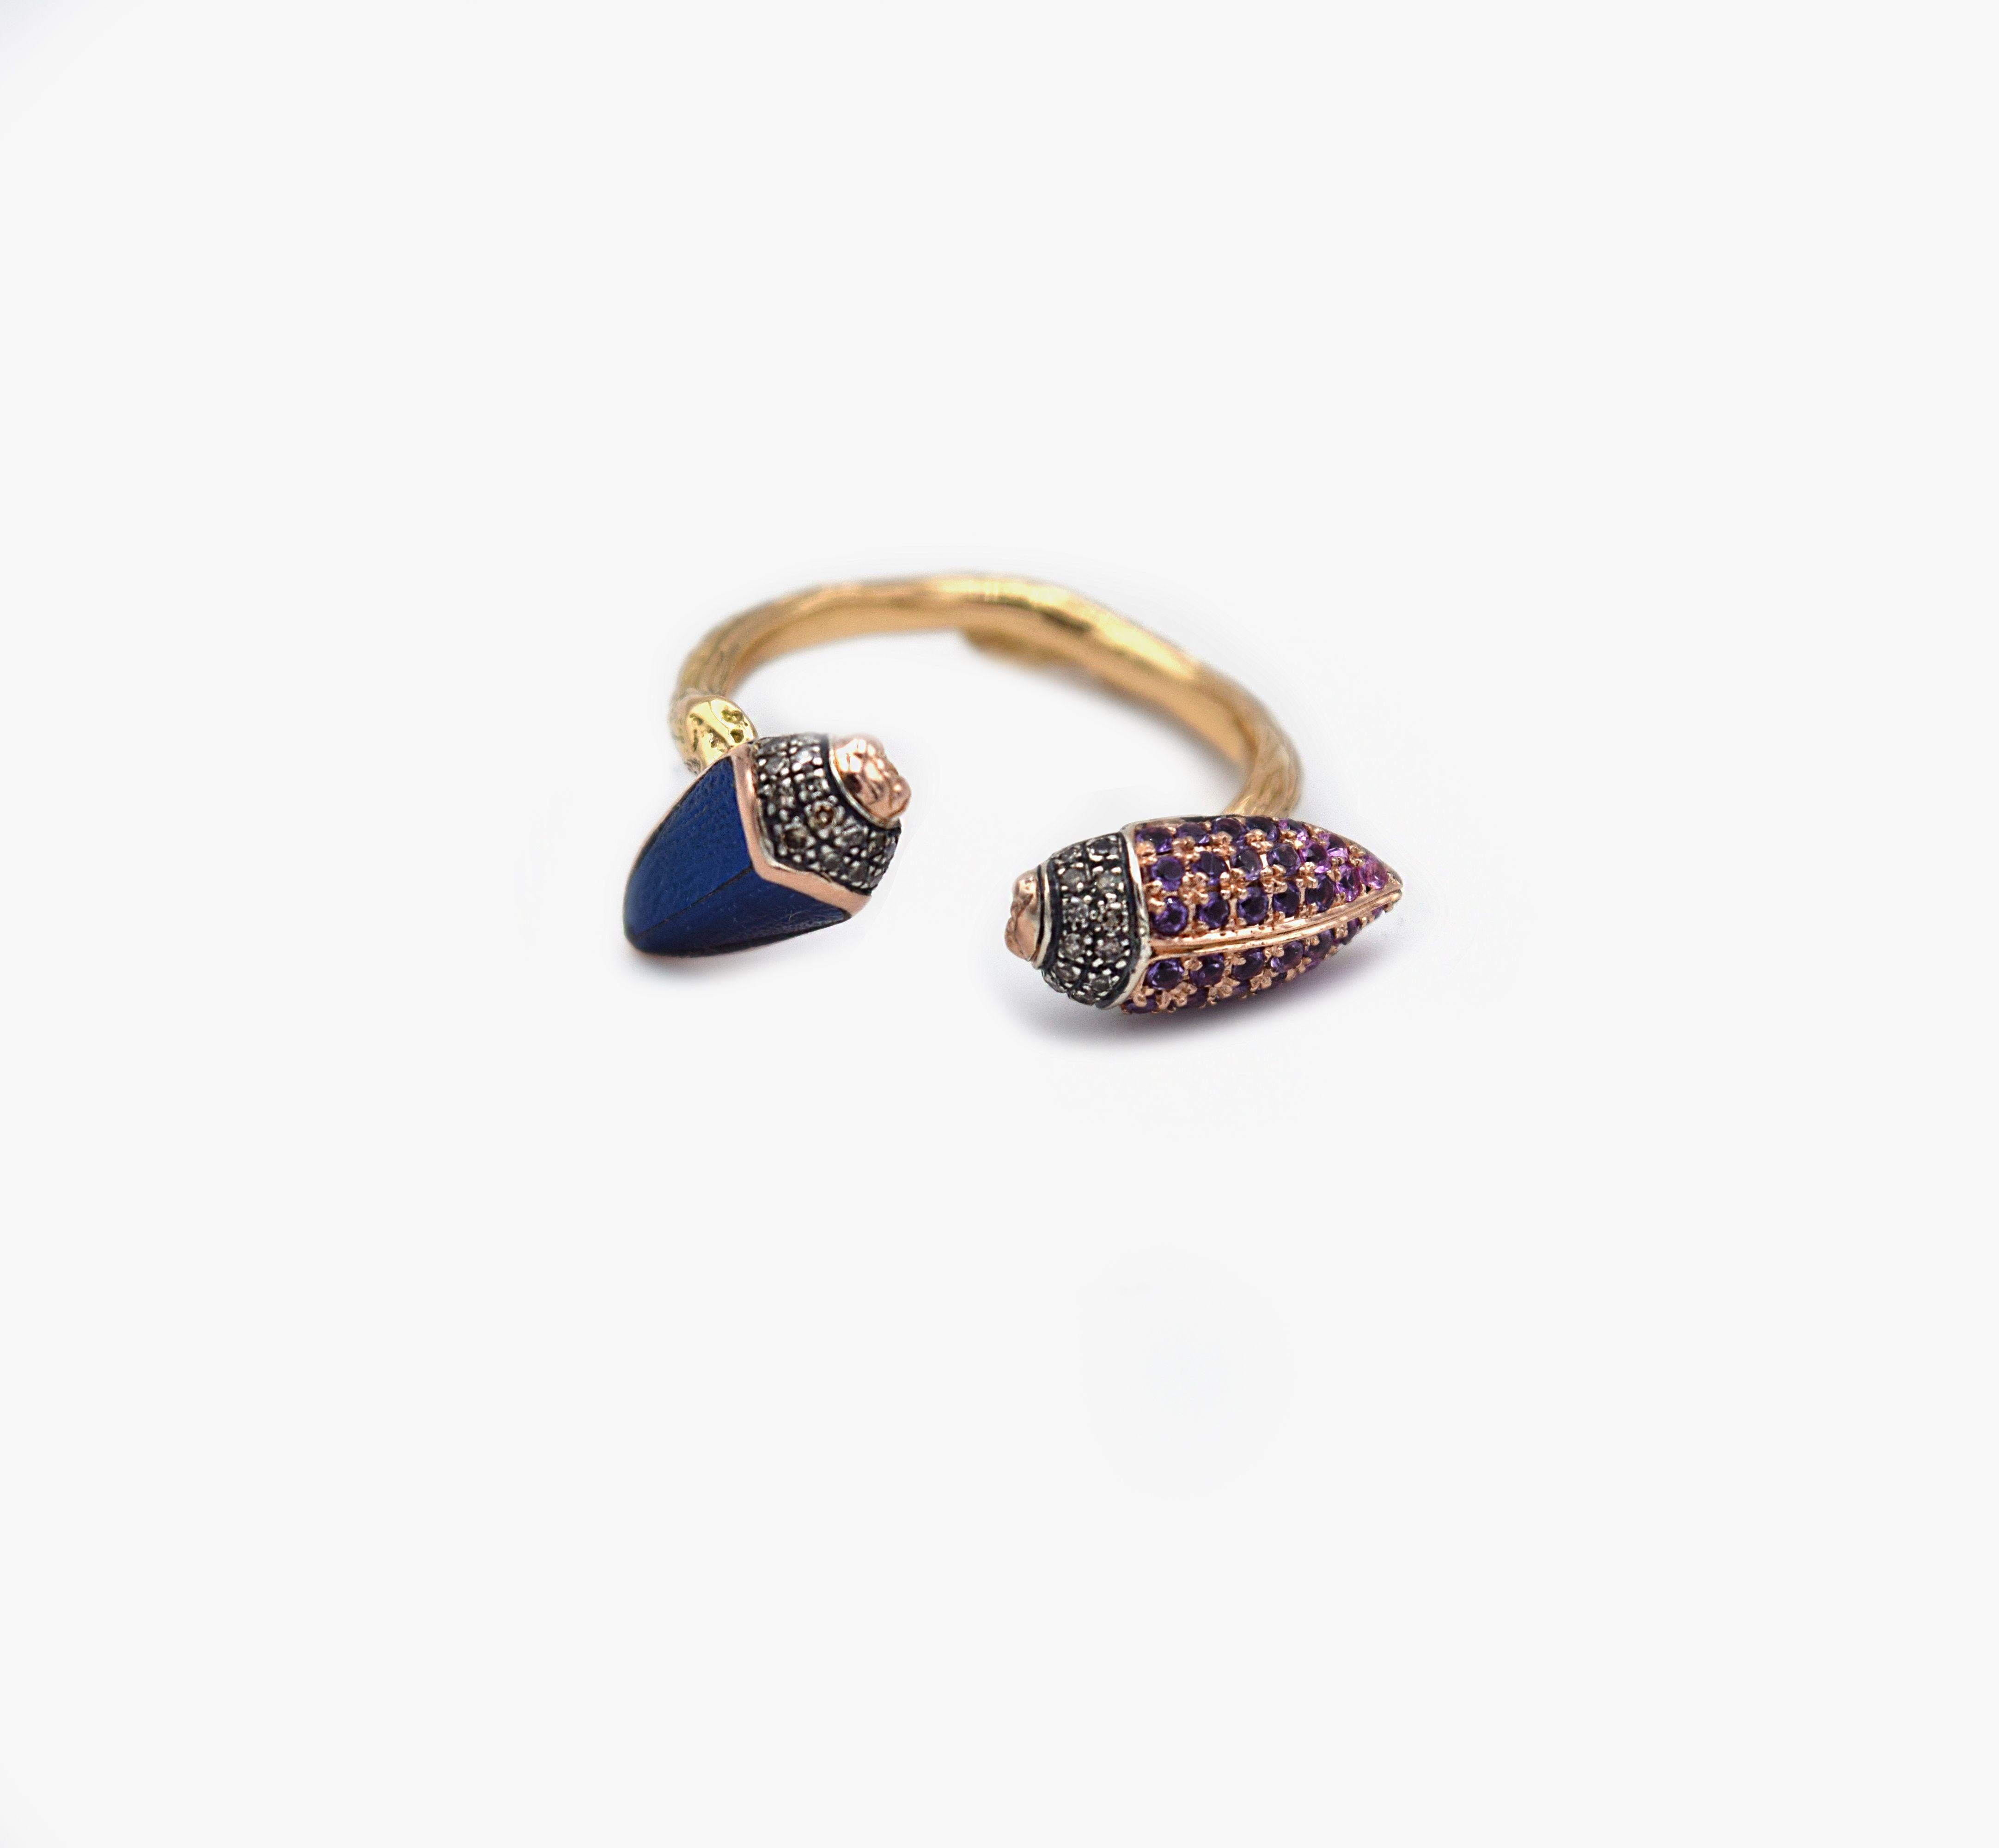 Inspired by the beauty of imperfection, Bibi van der Velden sculpts exotic materials into one of a kind jewelry evoking her respect for our natural world.

This ring features a unique design of floaty scarabs encrusted with real scarab wings, pink